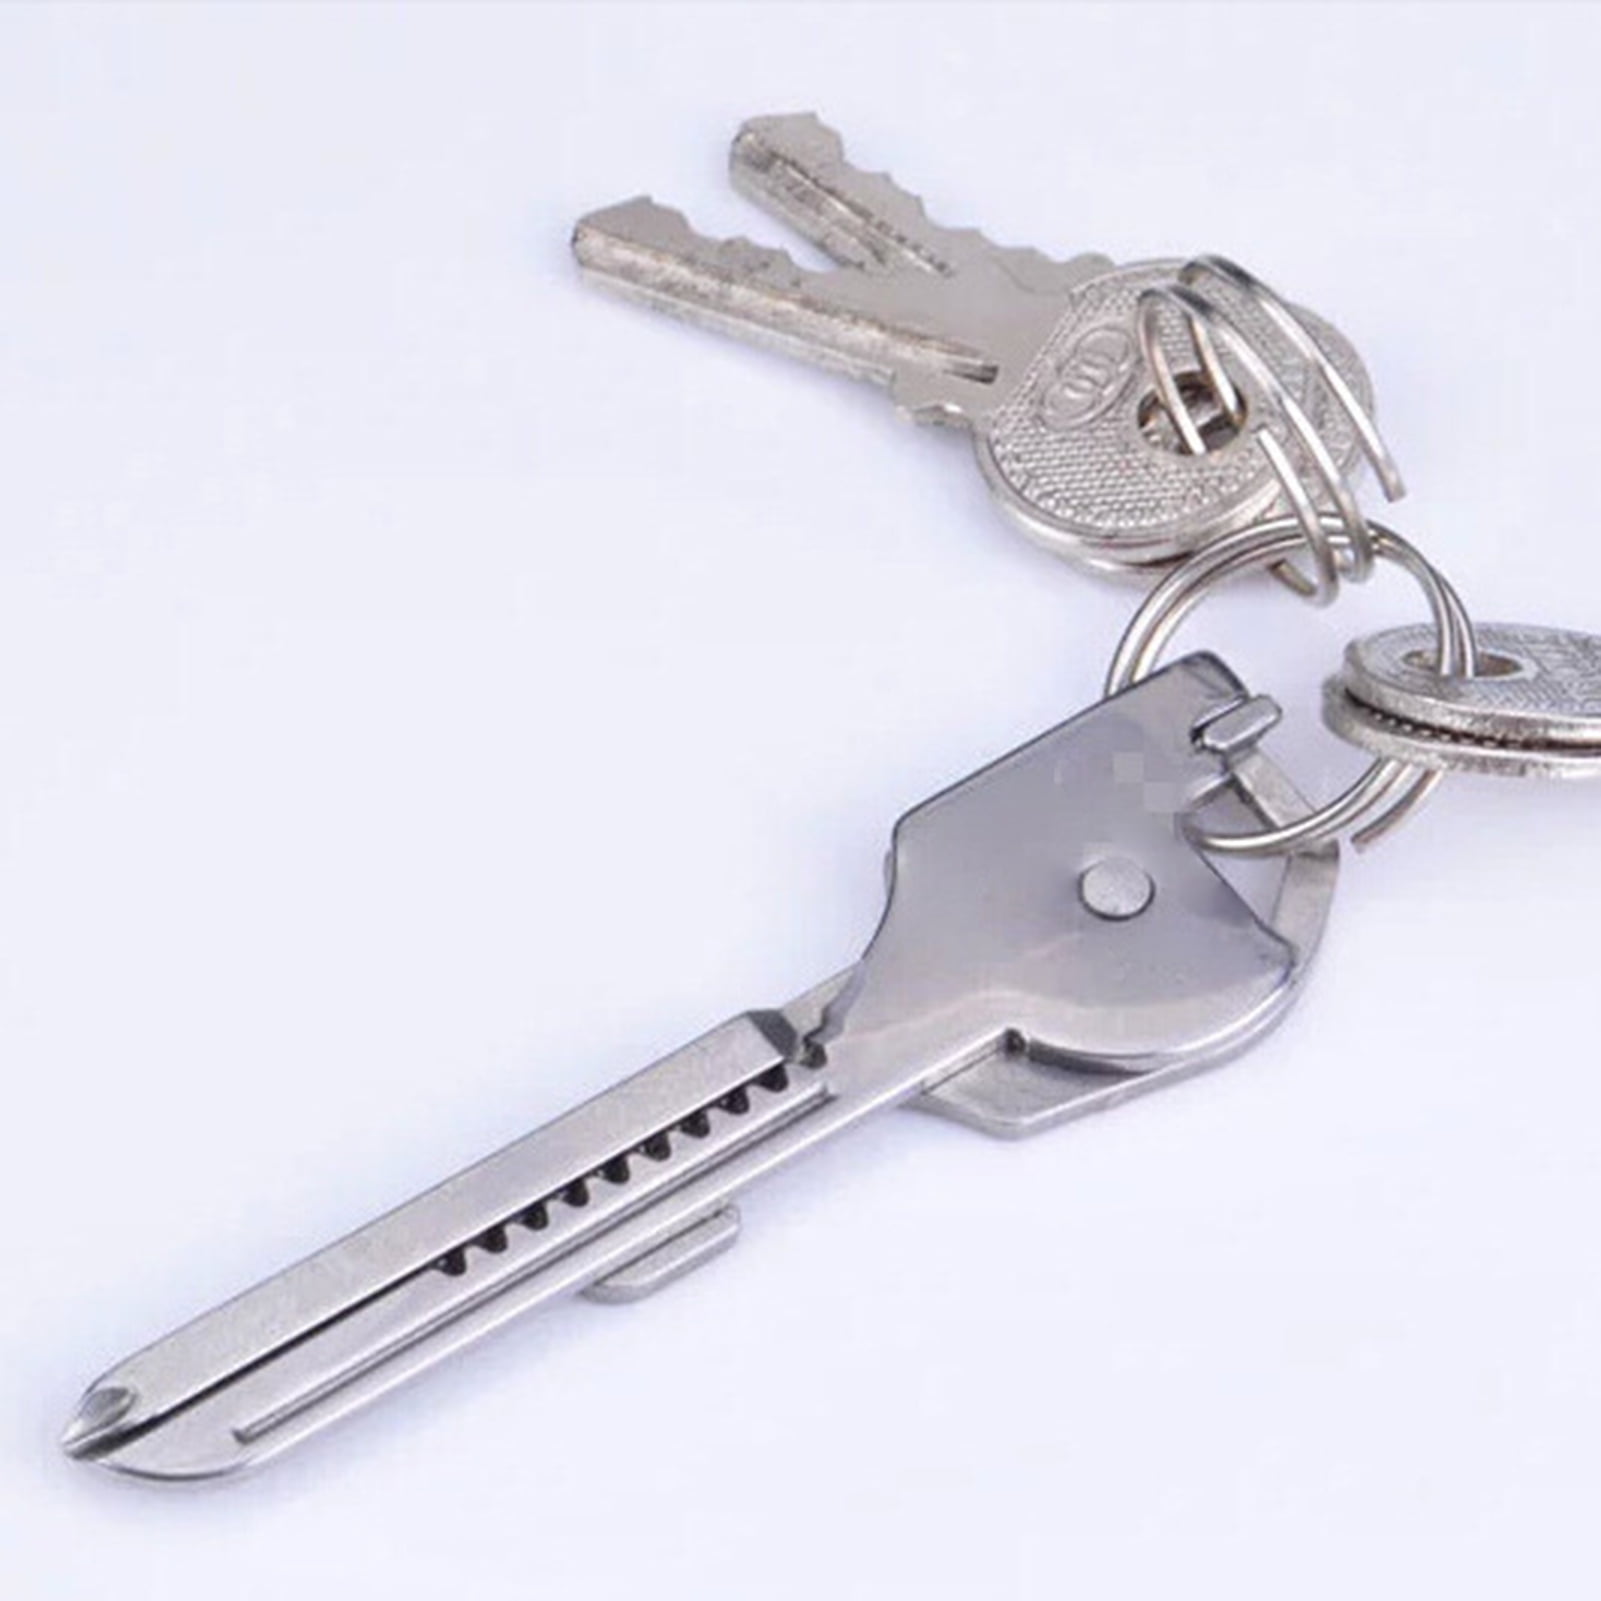 Tiny Cooking Tools Keychain - The Foundry Home Goods